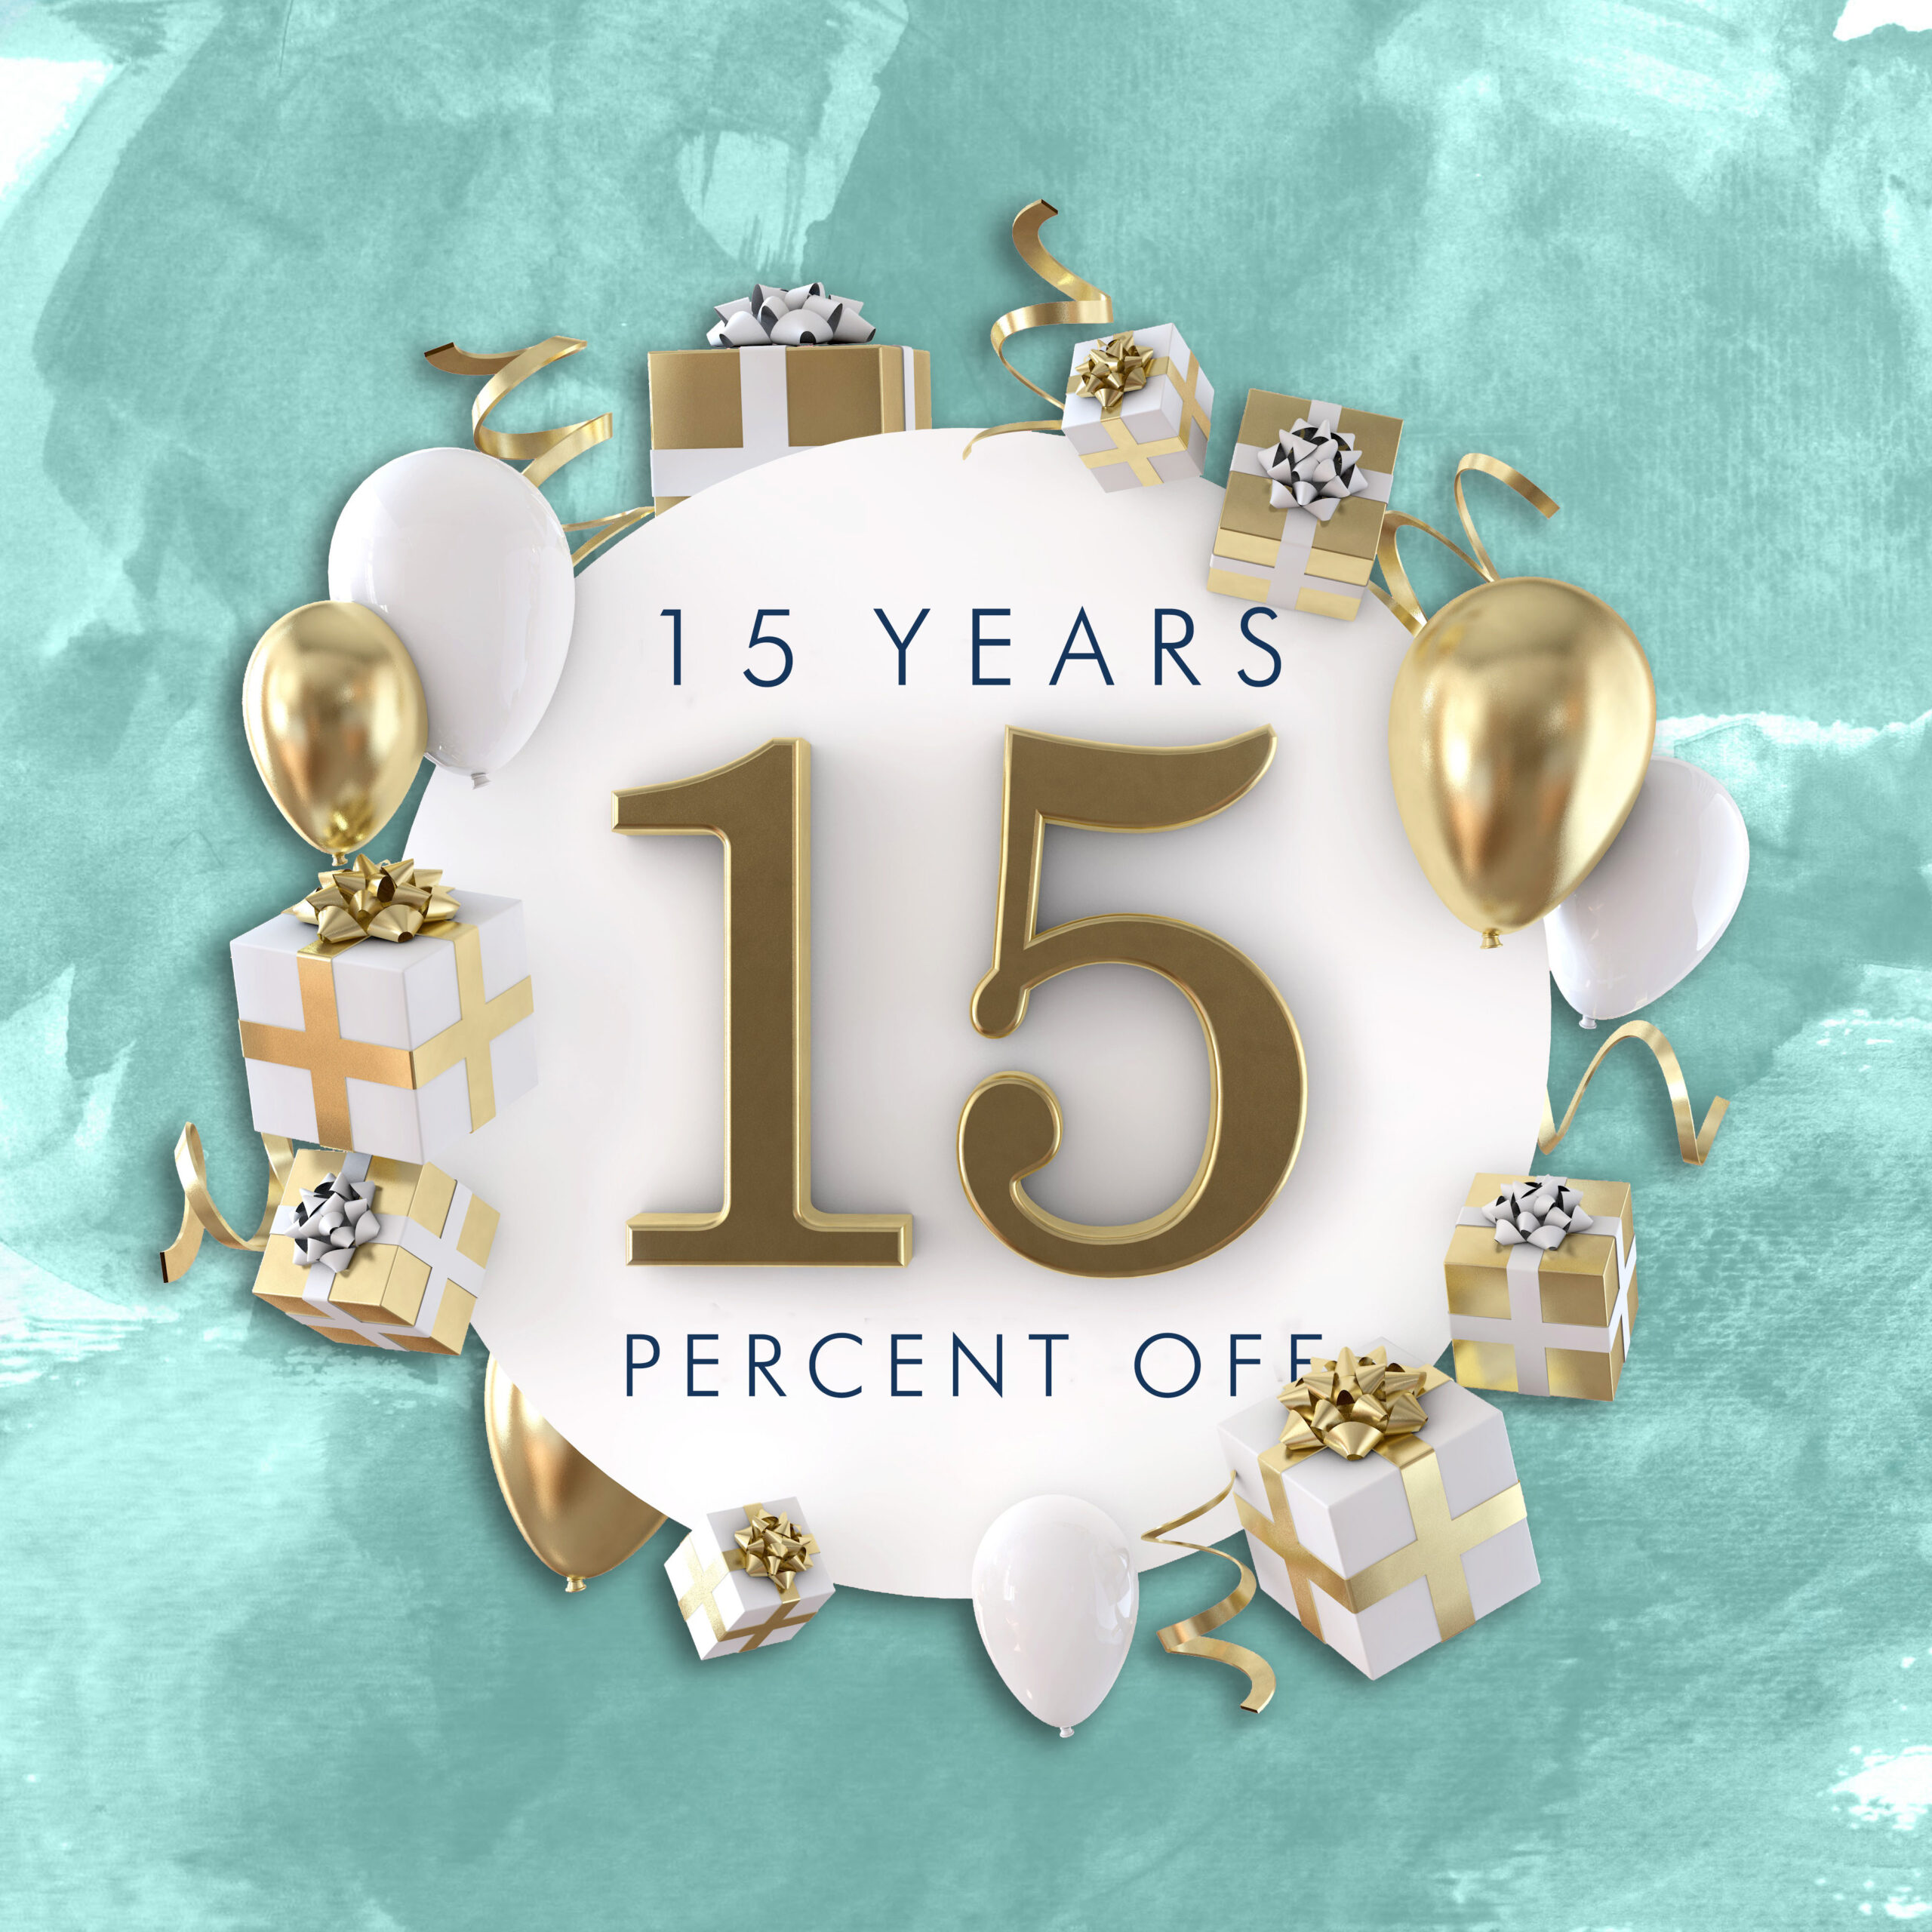 15 Years, 15% Off